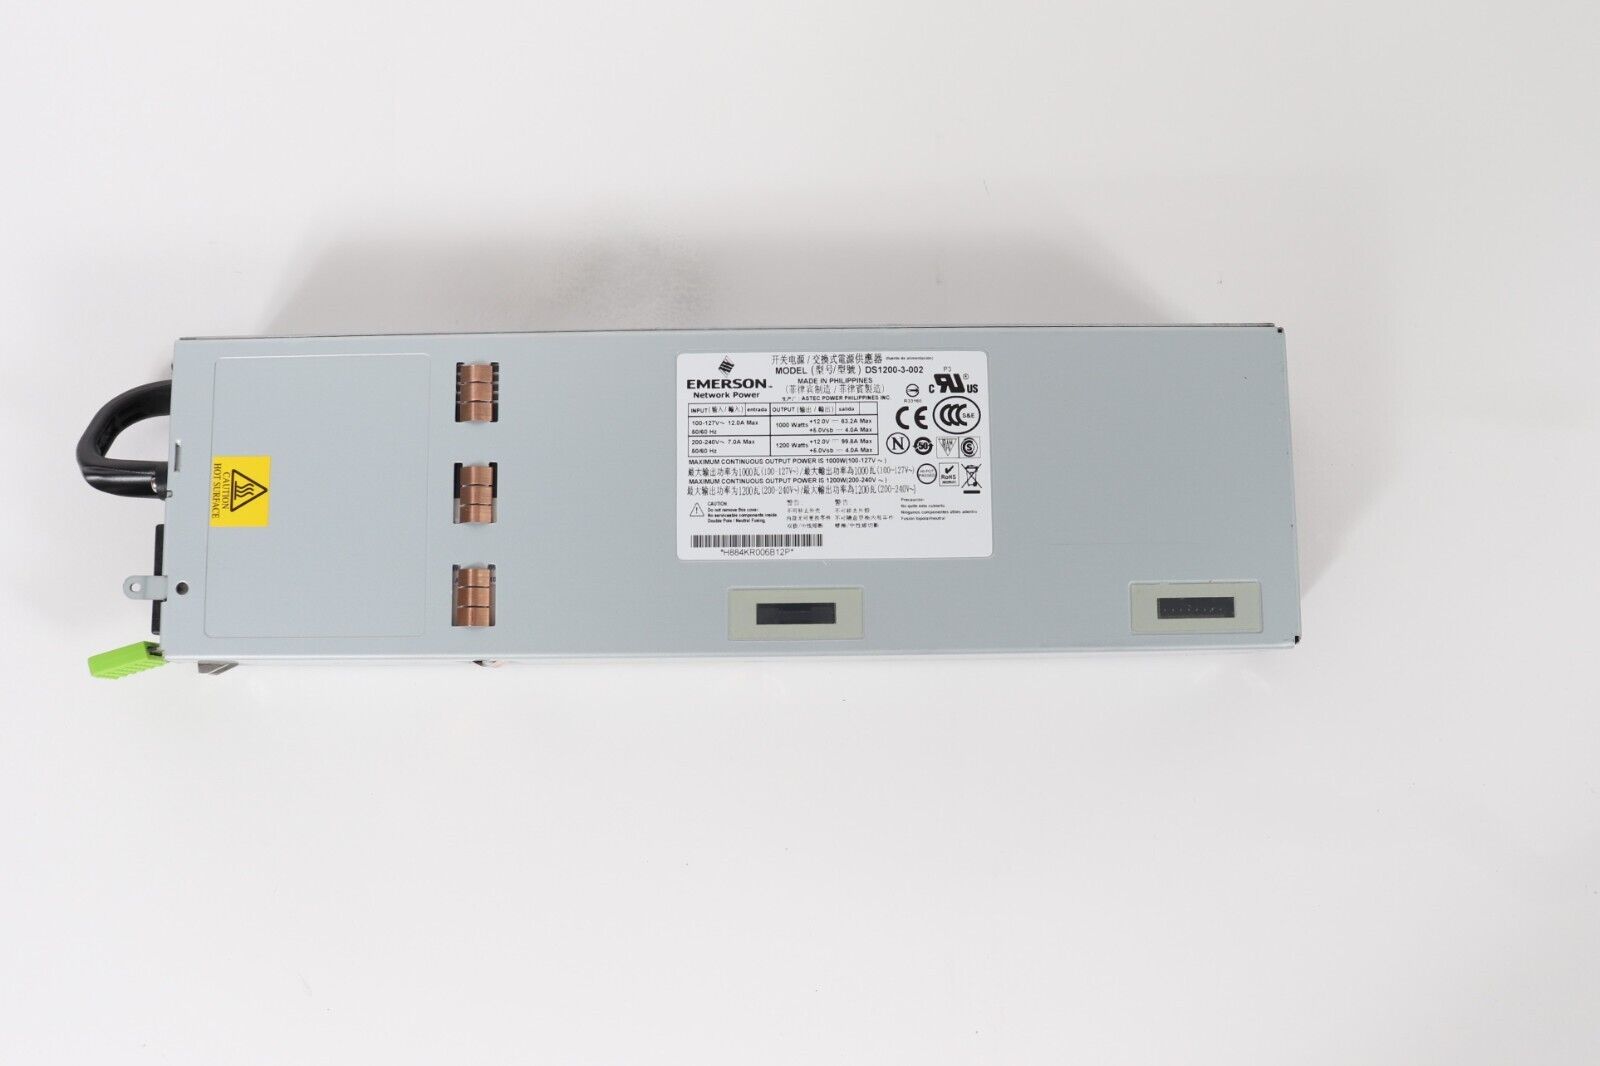 EMERSON DS1200-3-002 Network Power Supply 1200W